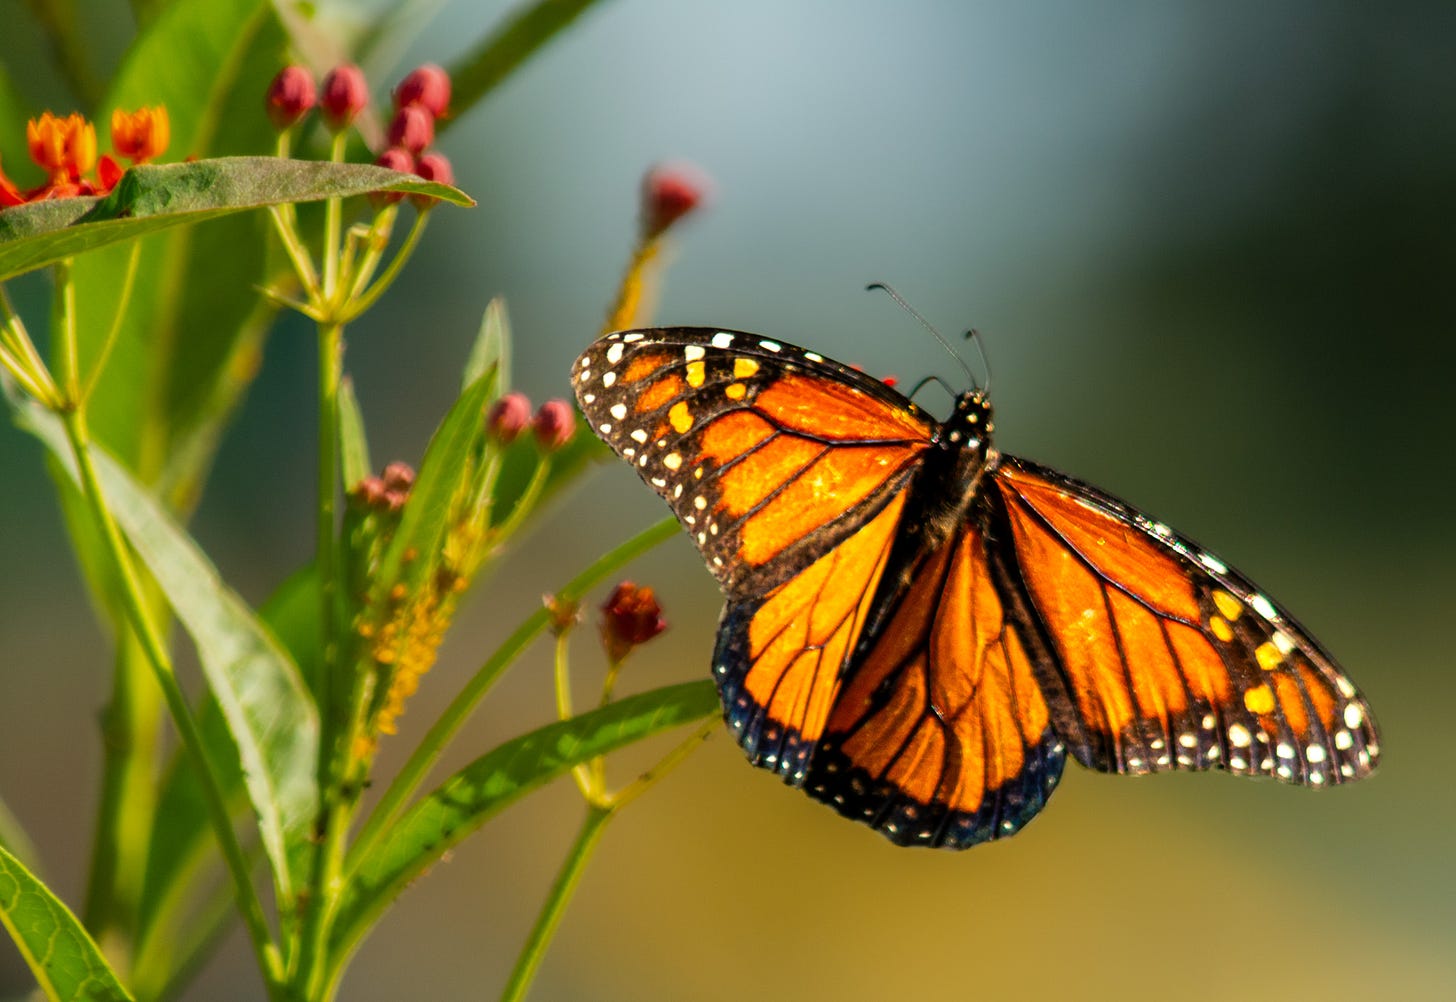 A  Monarch butterfly on the stem of an orange milkweed plant